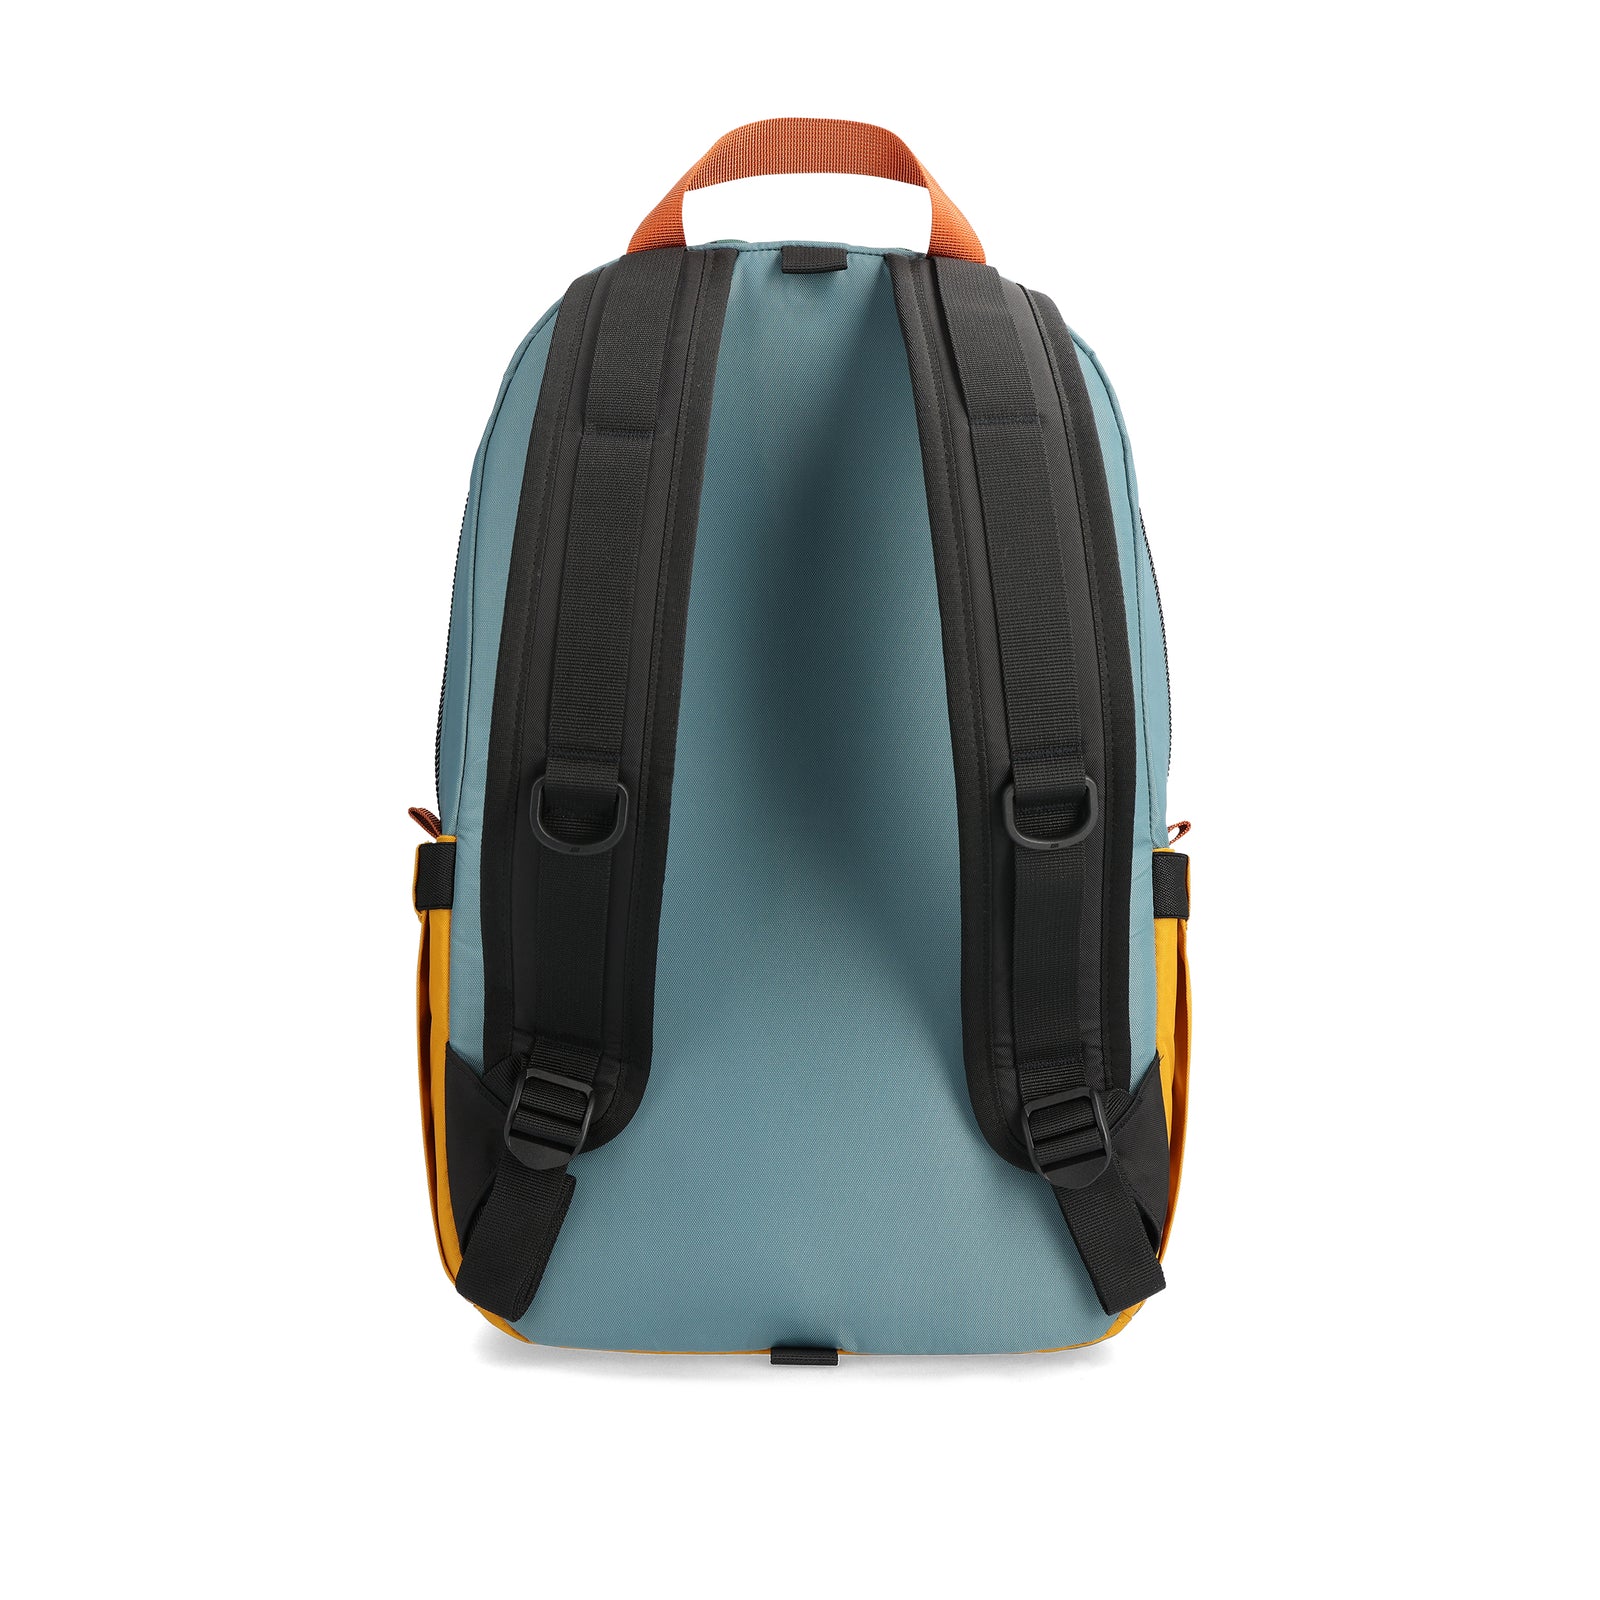 Back View of Topo Designs Light Pack in "Navy / Mustard"